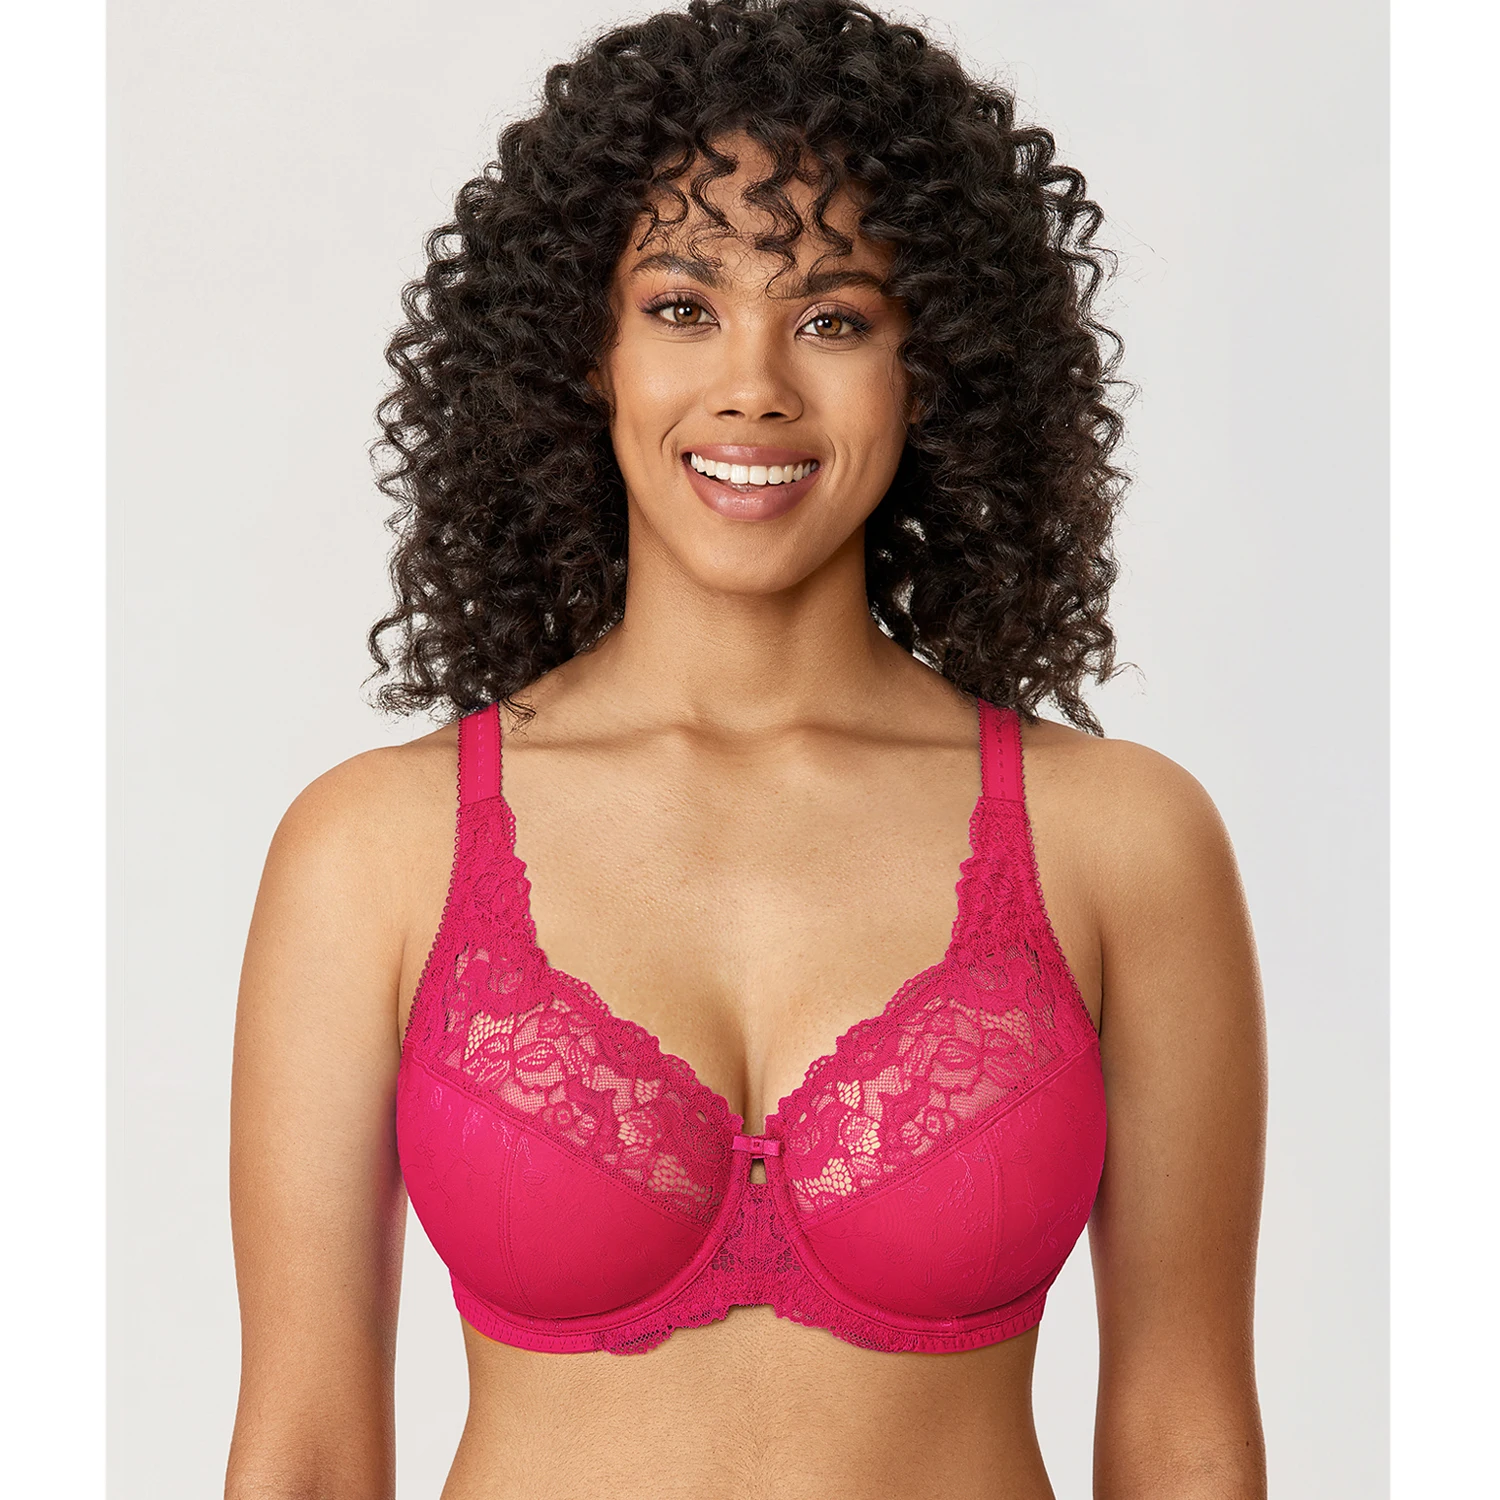 Smooth Full Minimizer Bra Figure Large Busts Underwire Embroidery